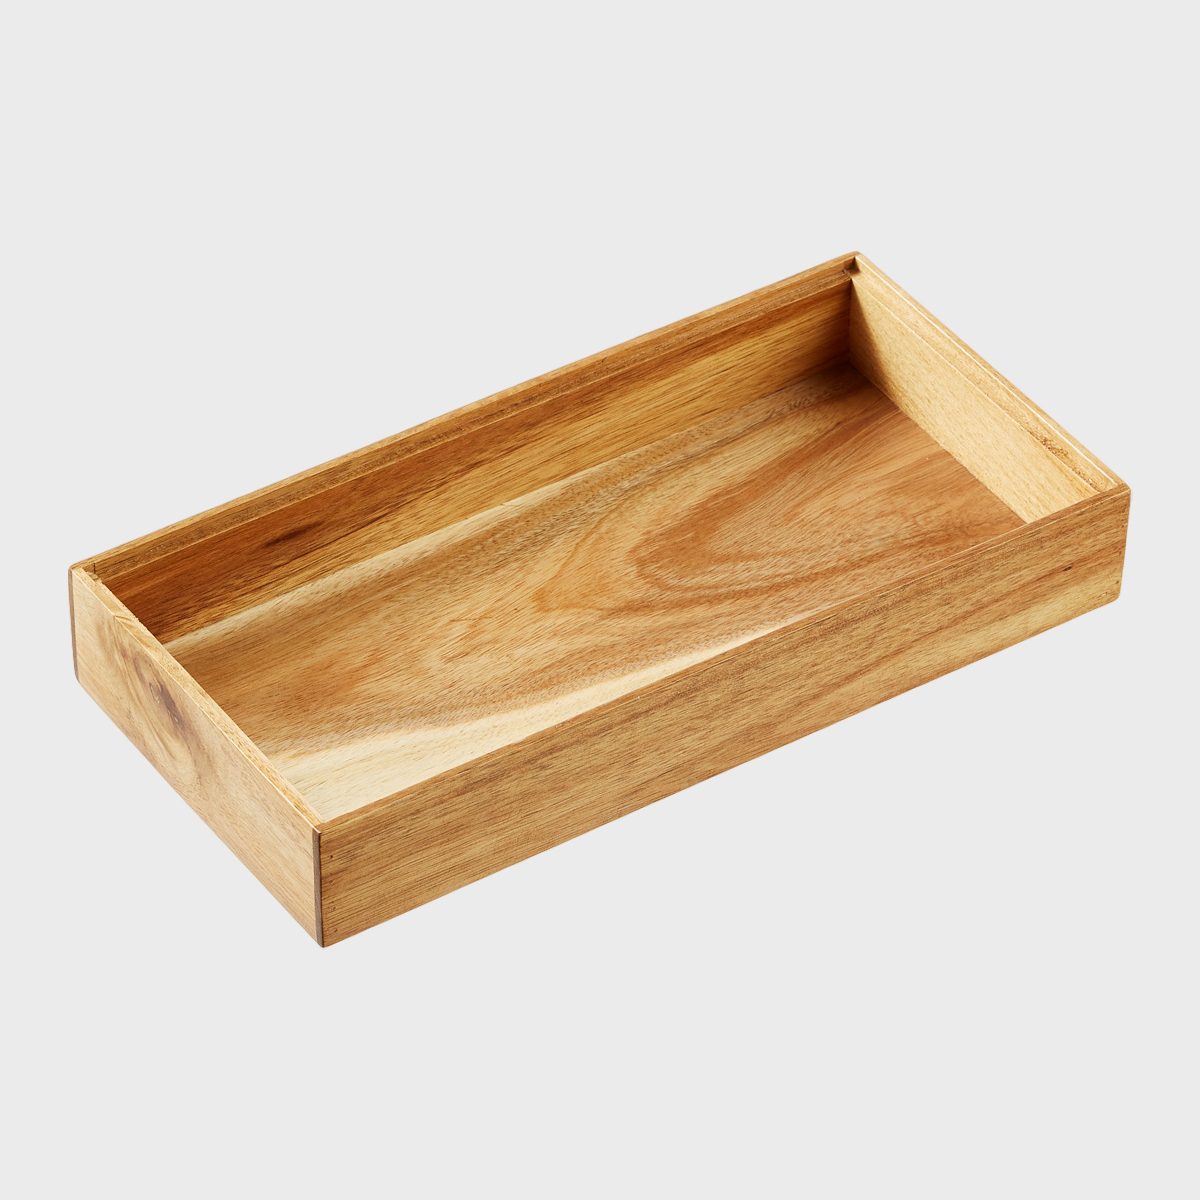 https://www.rd.com/wp-content/uploads/2023/10/Rowan-Acacia-Stacking-Drawer-Organizer_ecomm_via-containerstore.com_.jpg?fit=700%2C700